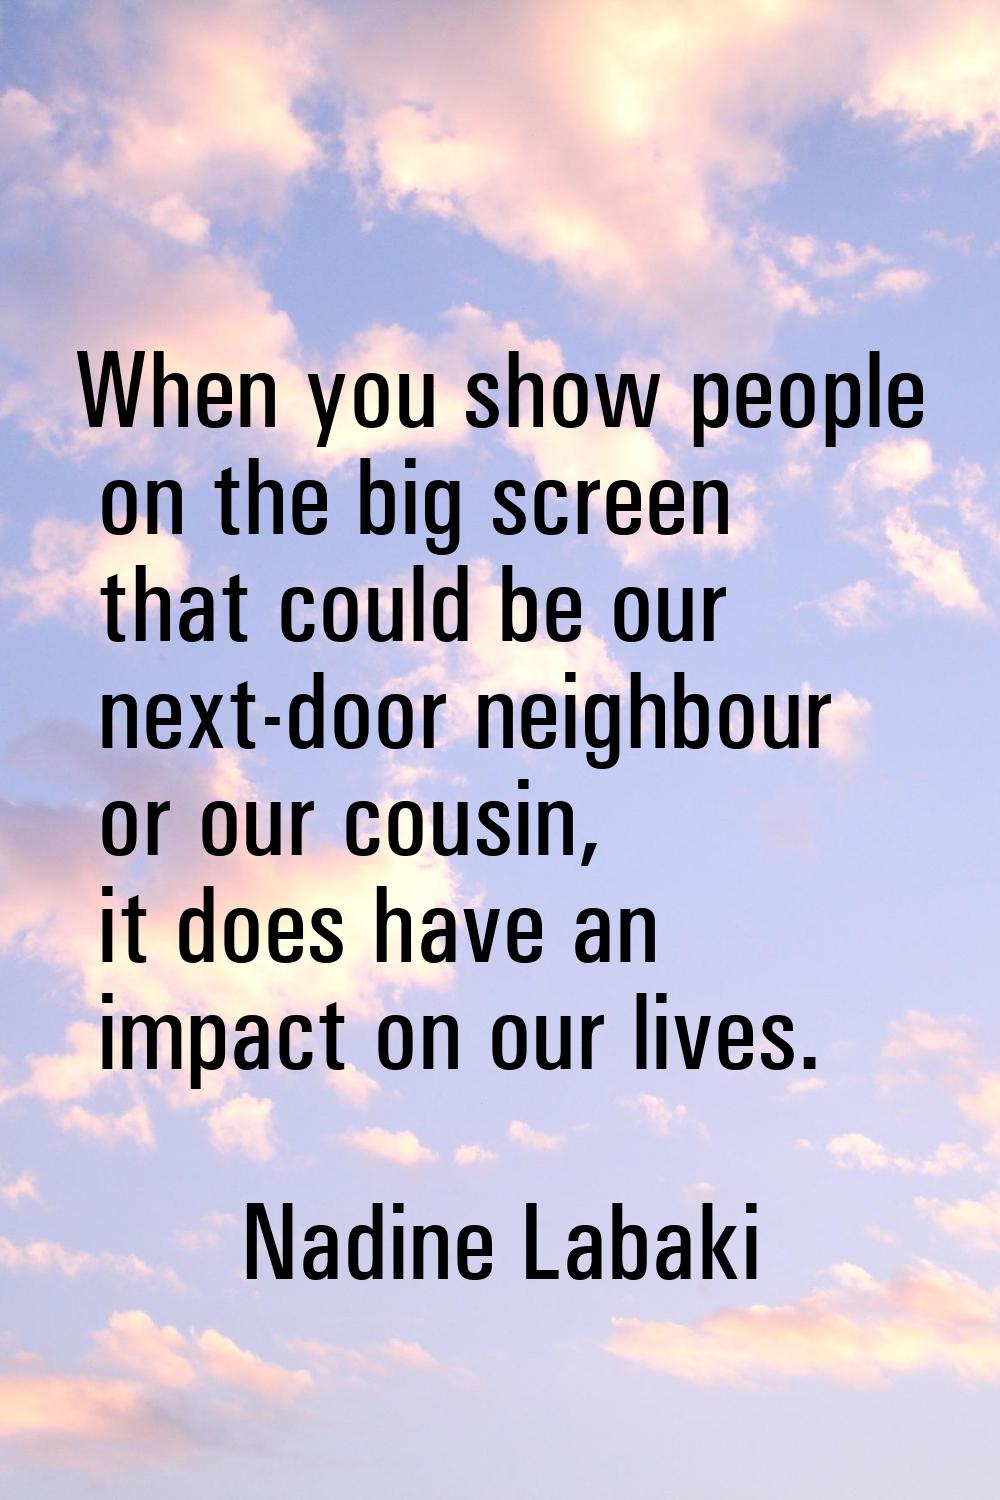 When you show people on the big screen that could be our next-door neighbour or our cousin, it does